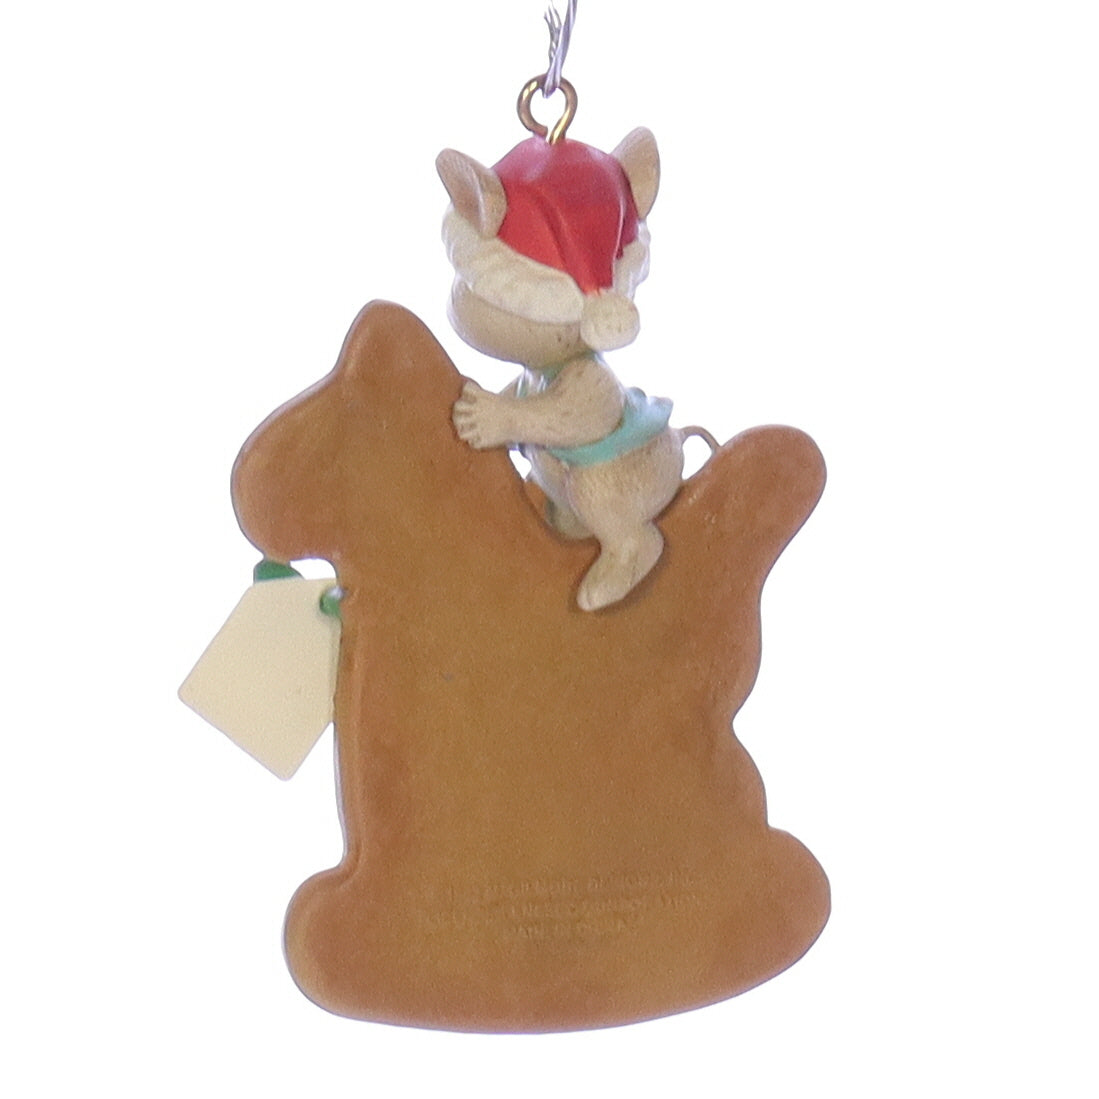 Enesco_Treasury_of_Christmas_Ornaments_8315814_Gingerbread_Greetings_Mouse_Ornament_1992 Back View